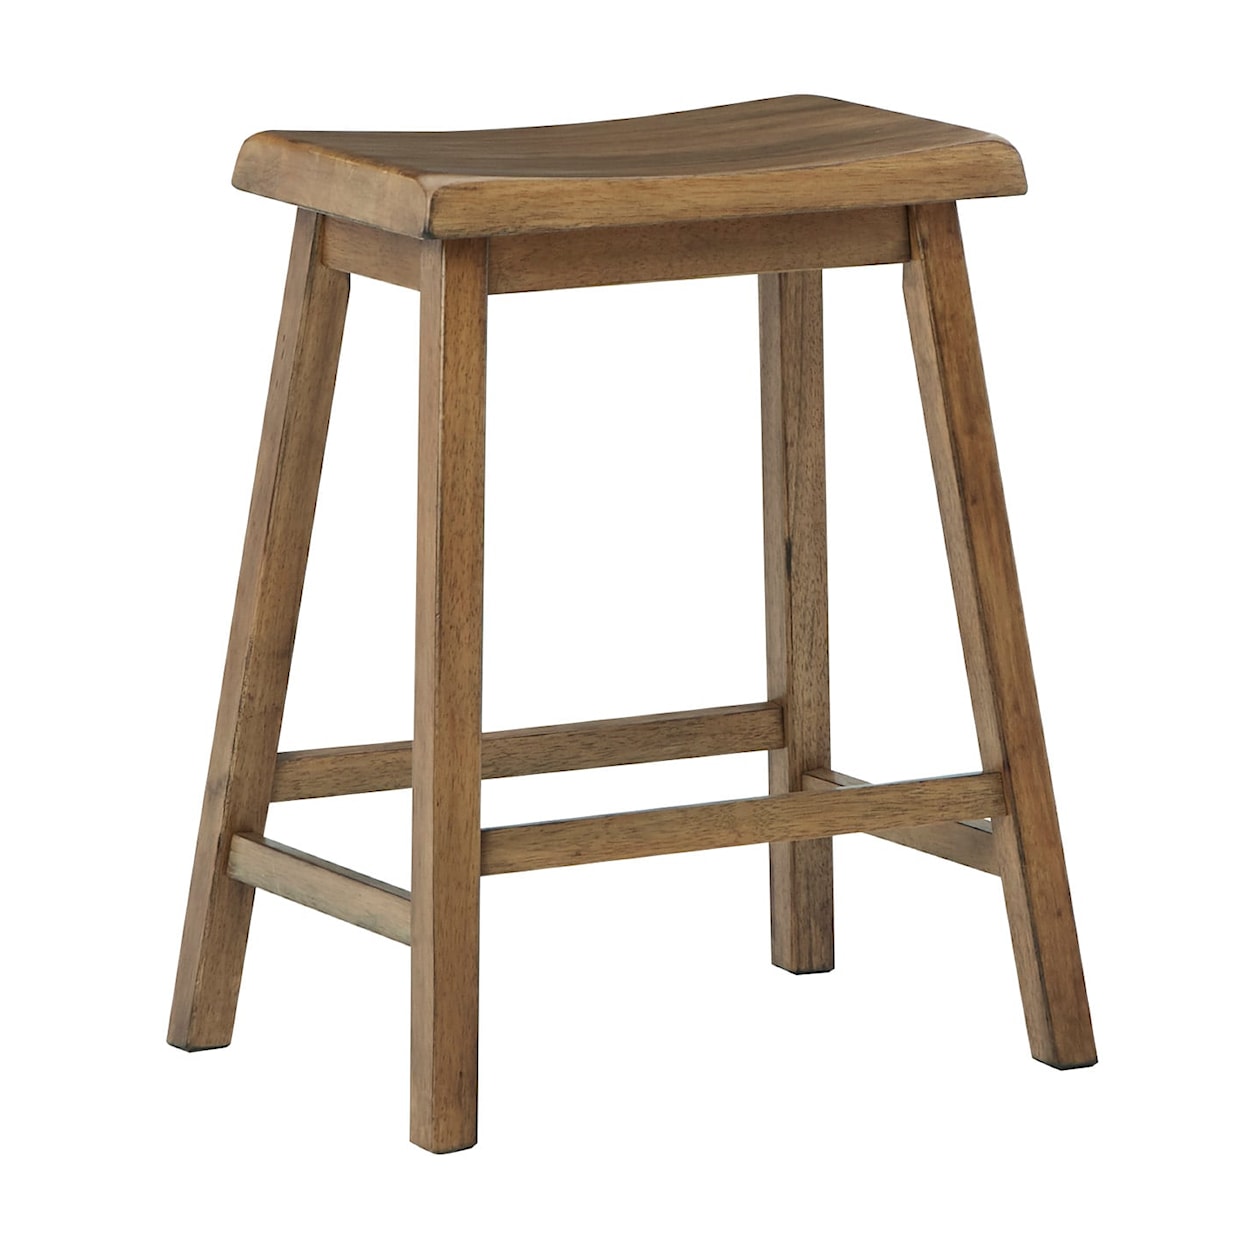 Signature Design by Ashley Shully Counter Height Stool